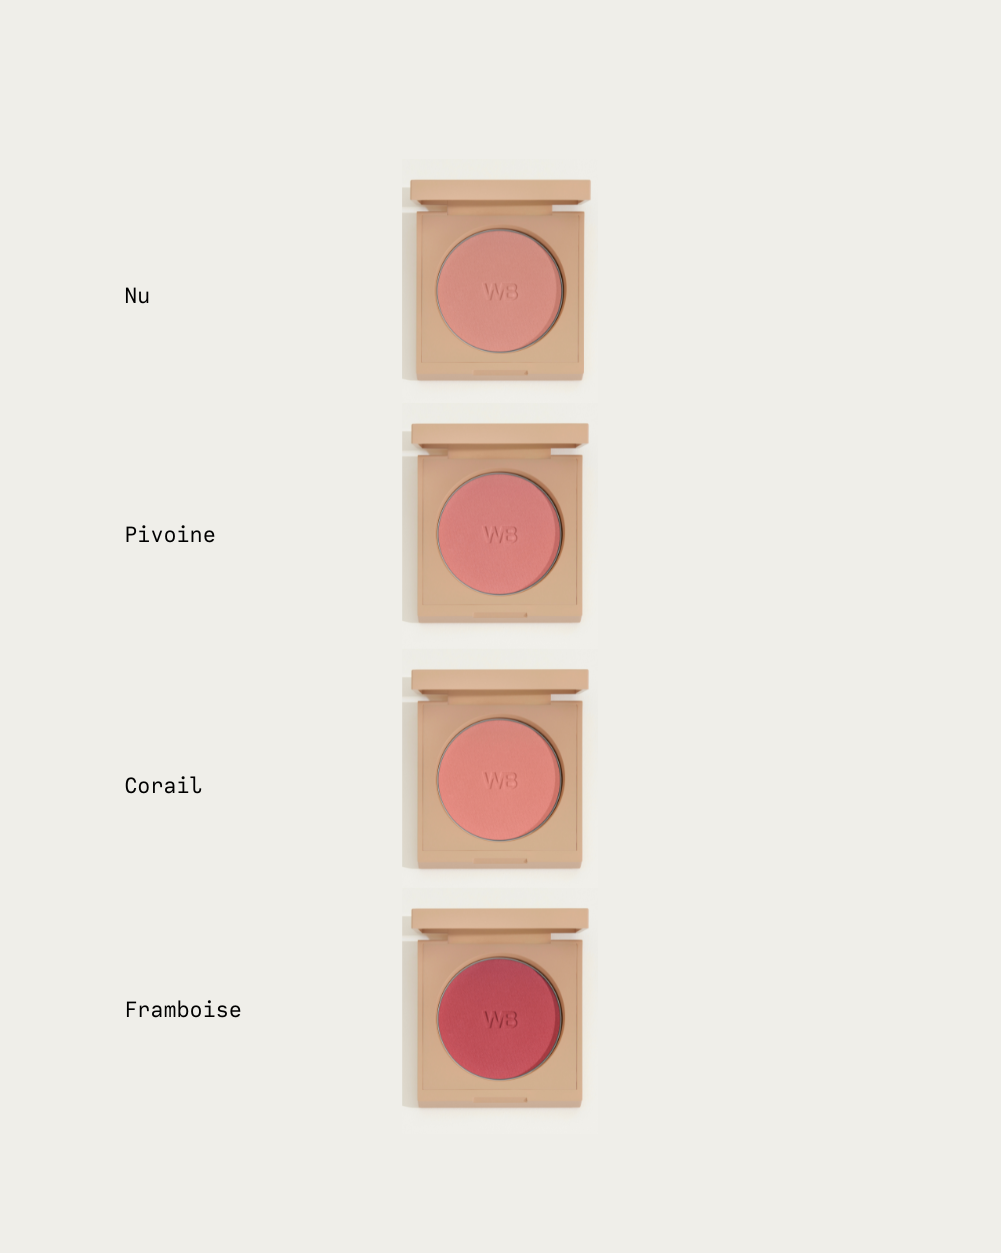 SWATCHES_14_5875955a-965b-483d-ab13-e9fb6a614bec.png